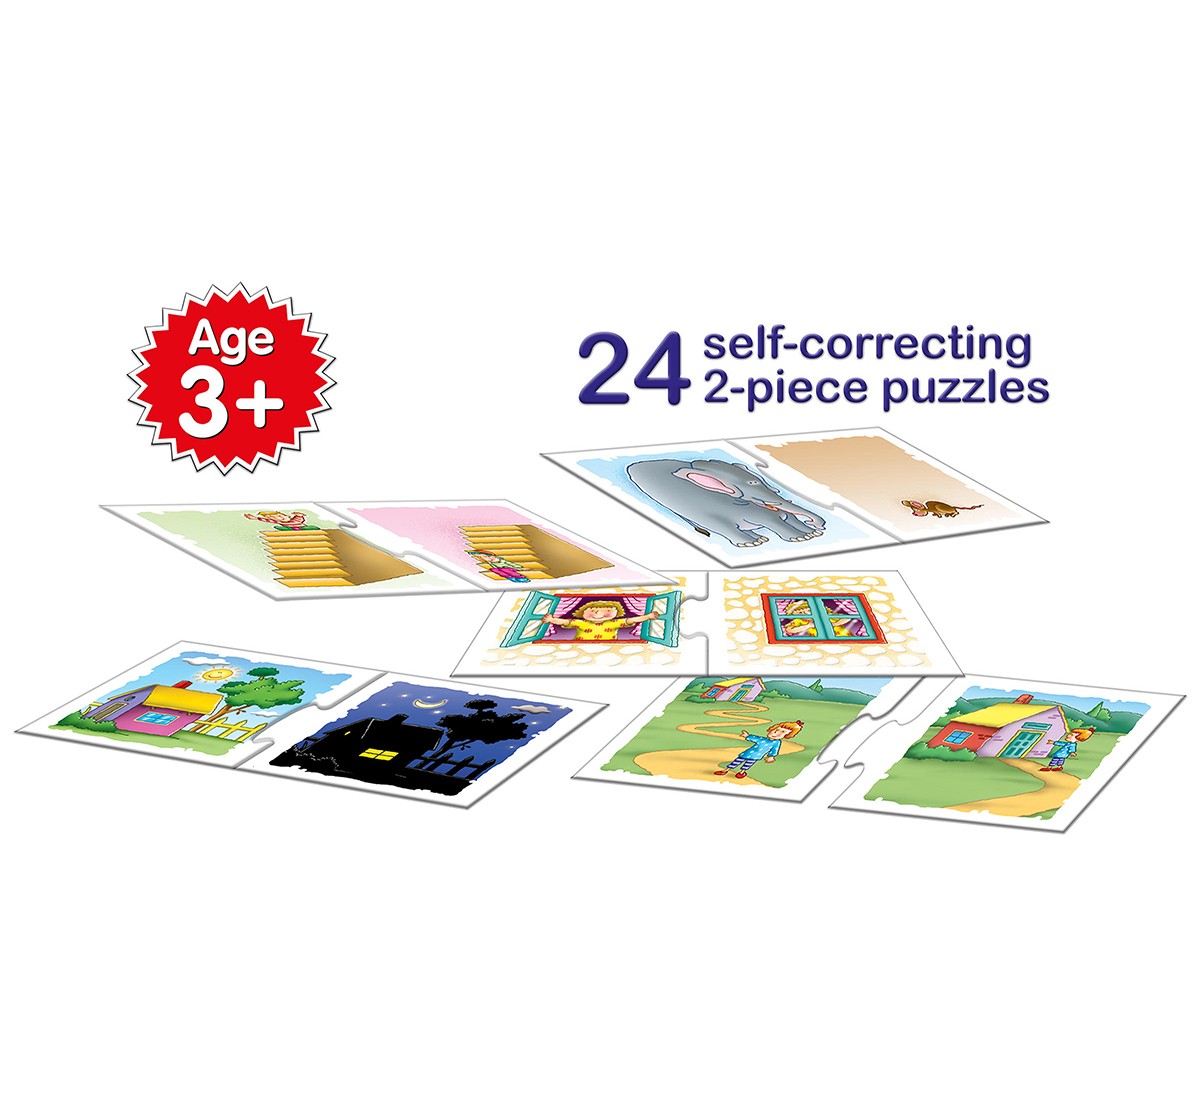 Frank Opposites Puzzle Puzzles for Kids age 3Y+ 